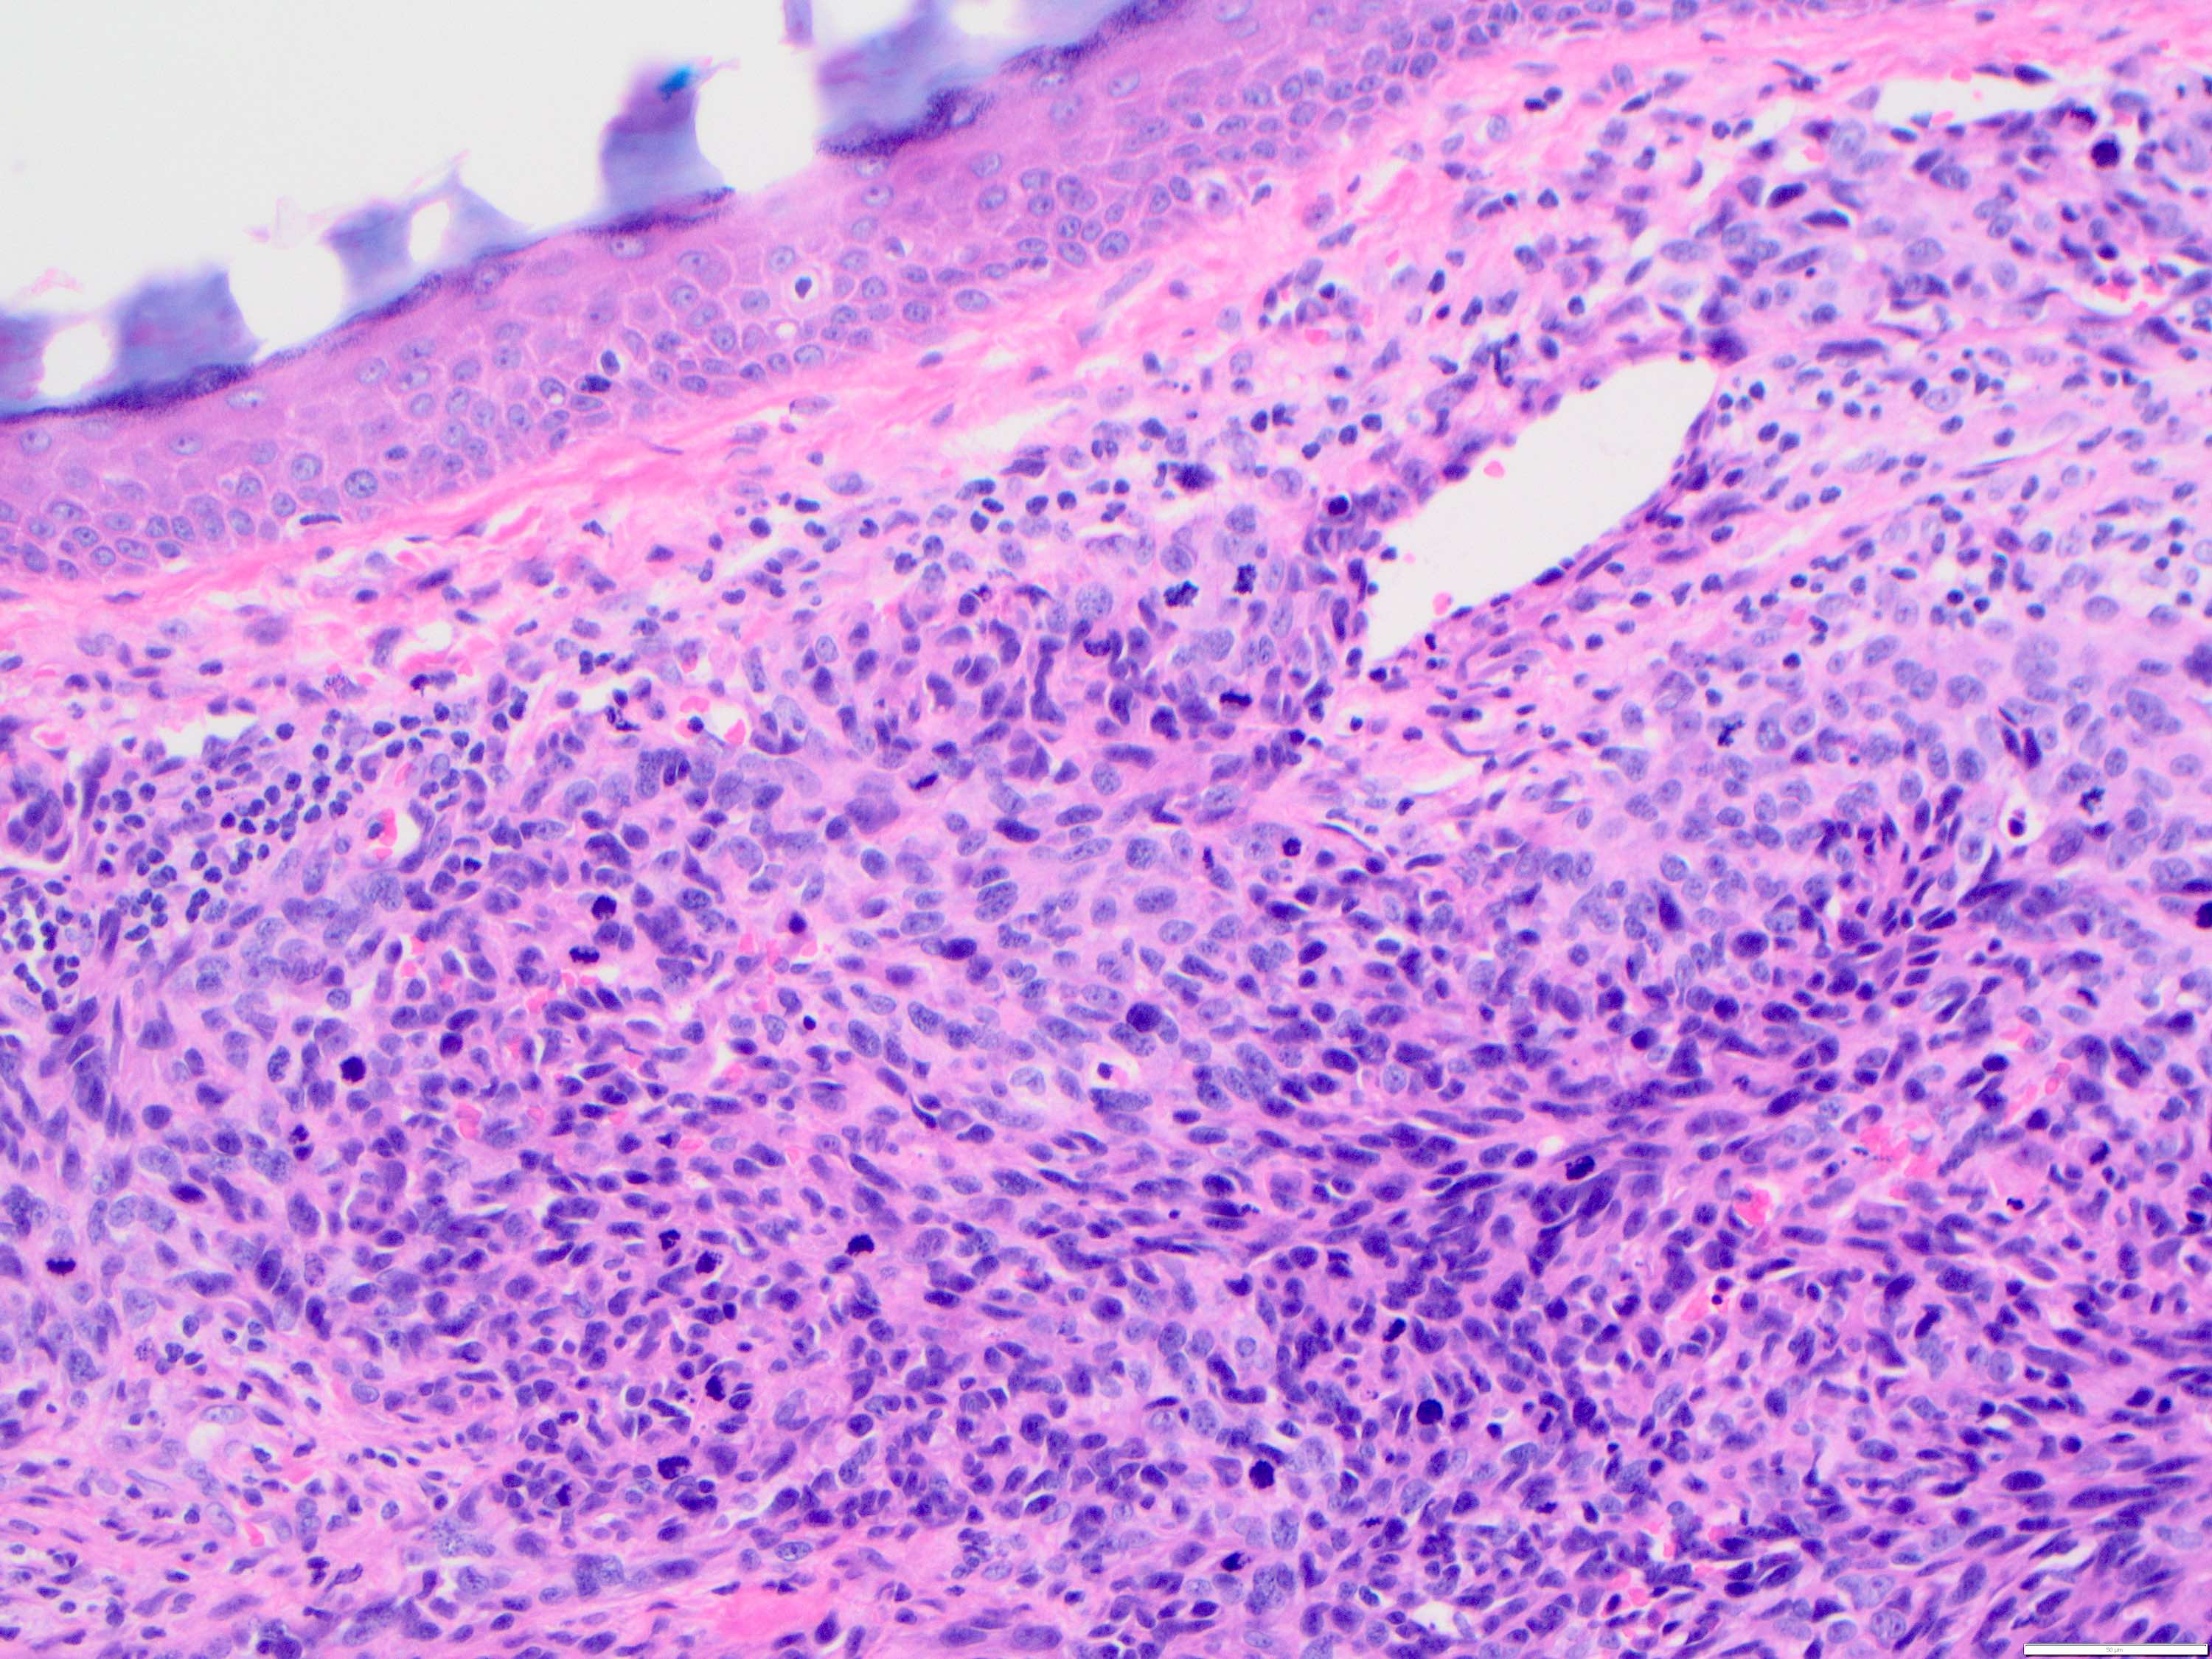 Solid pattern of angiosarcoma